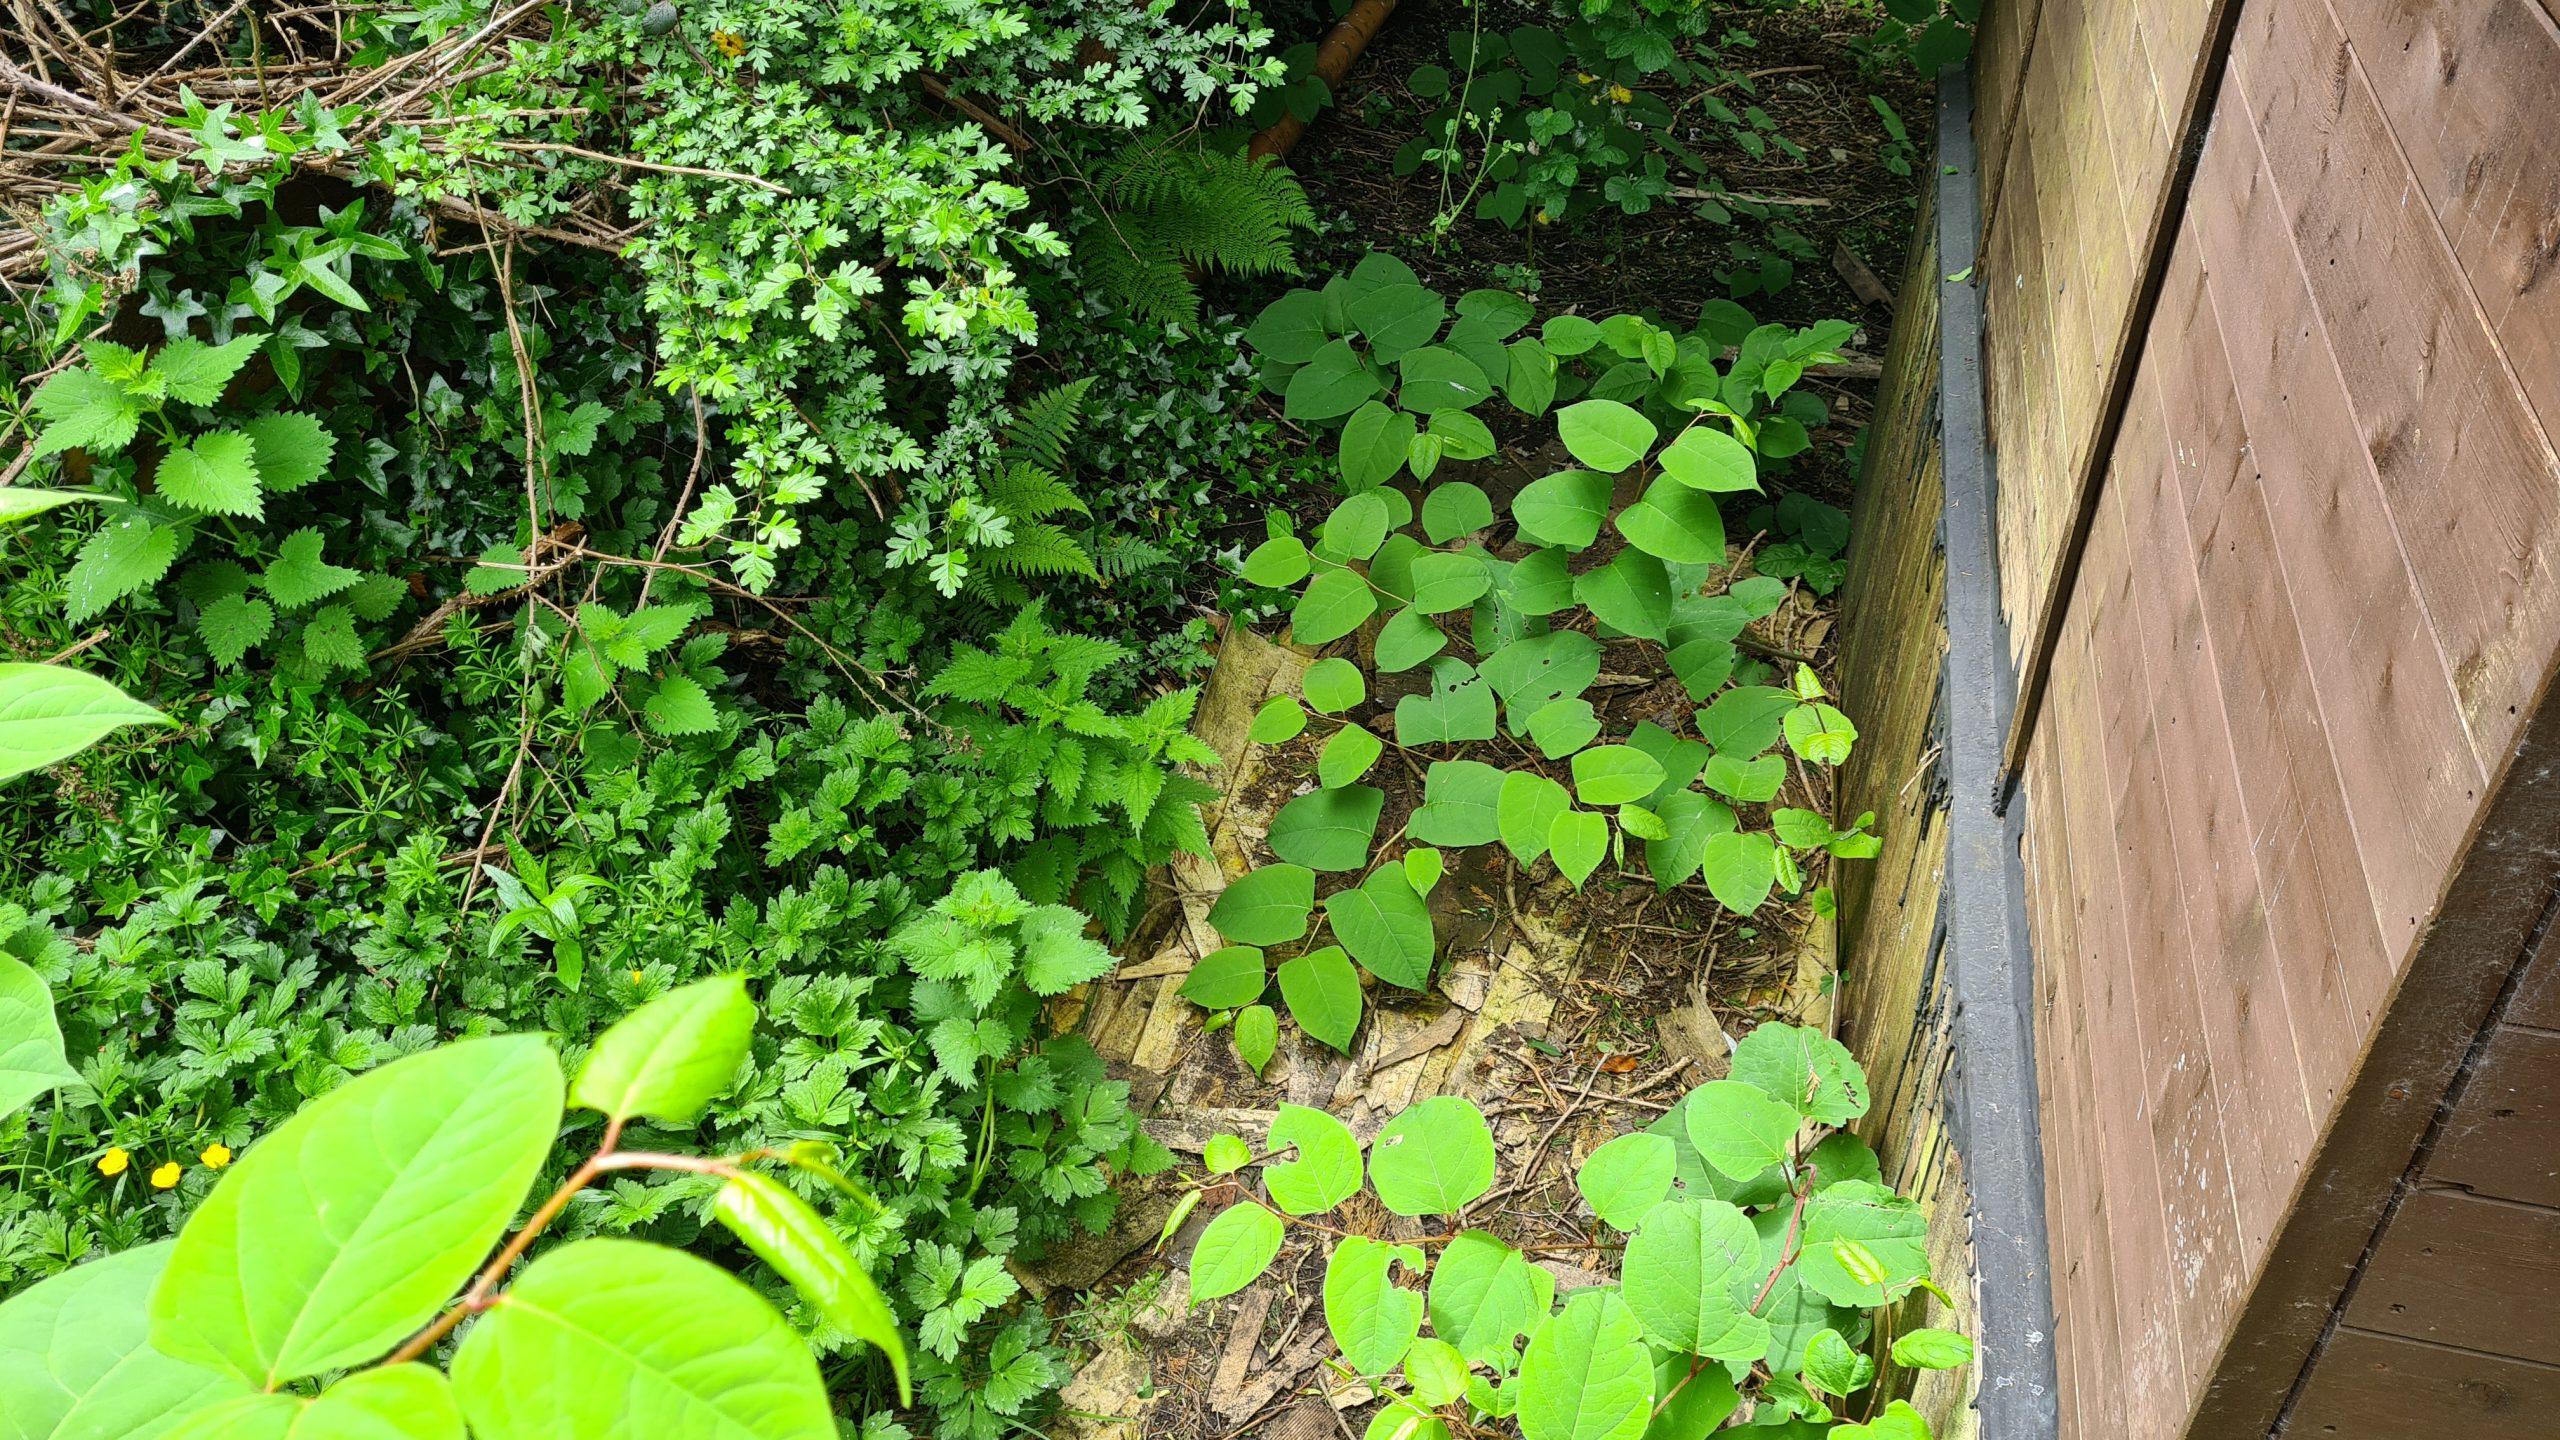 Japanese knotweed finds any space to grow and take over